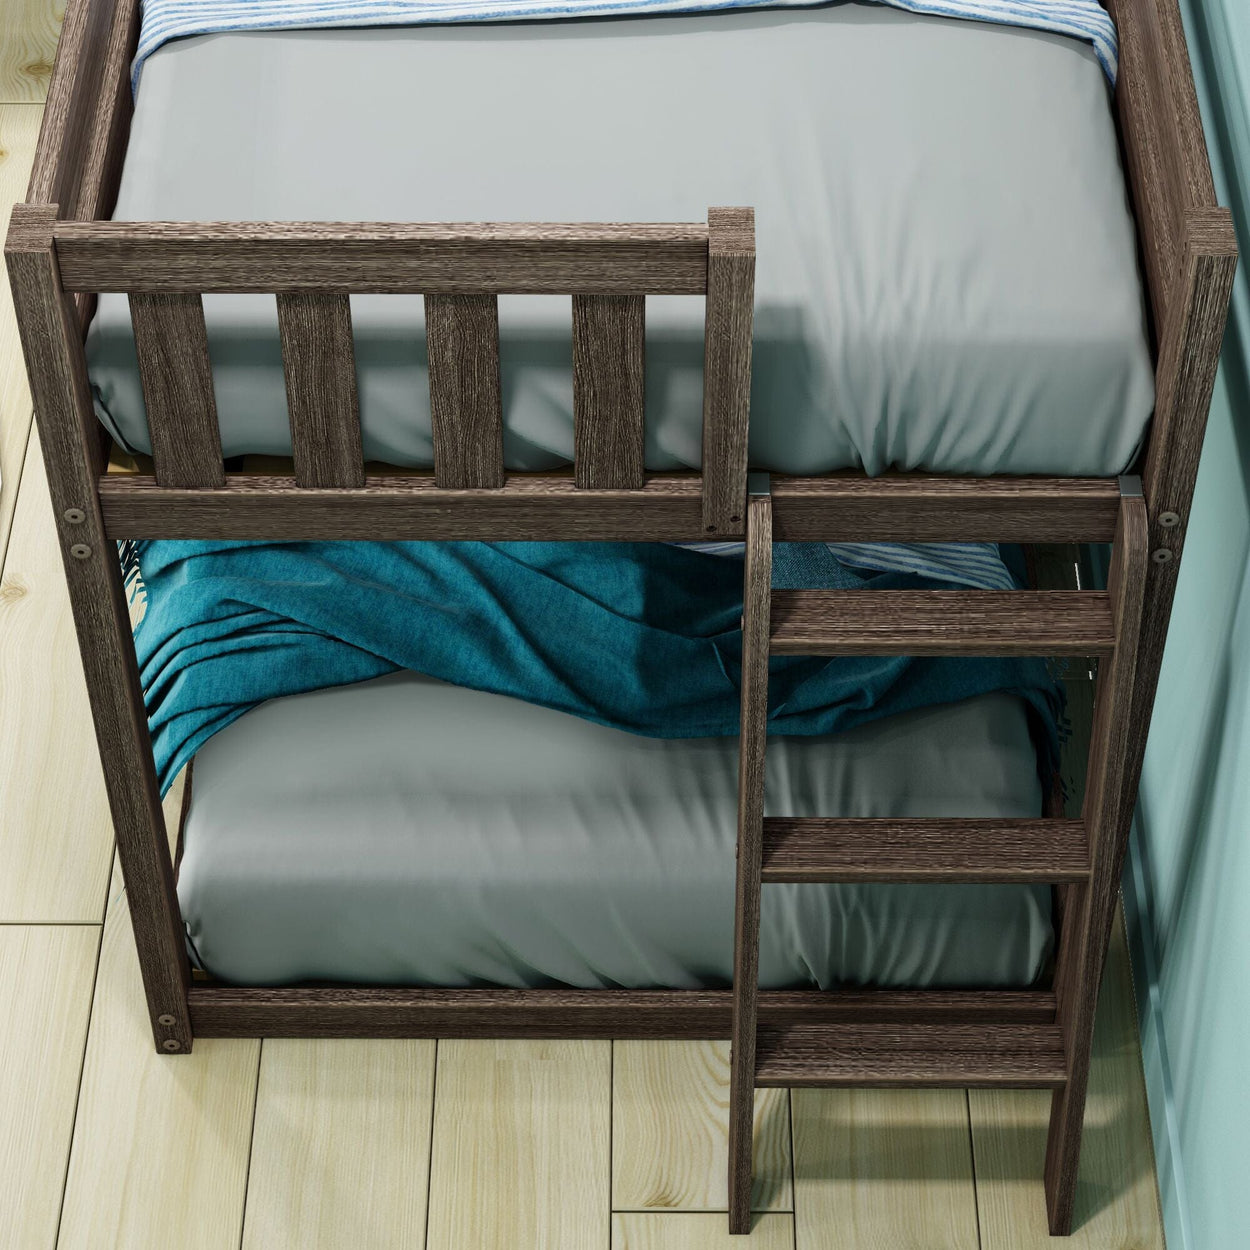 185321-151 : Bunk Beds Twin over Twin Low Bunk Bed with Ladder on End and Slide, Clay